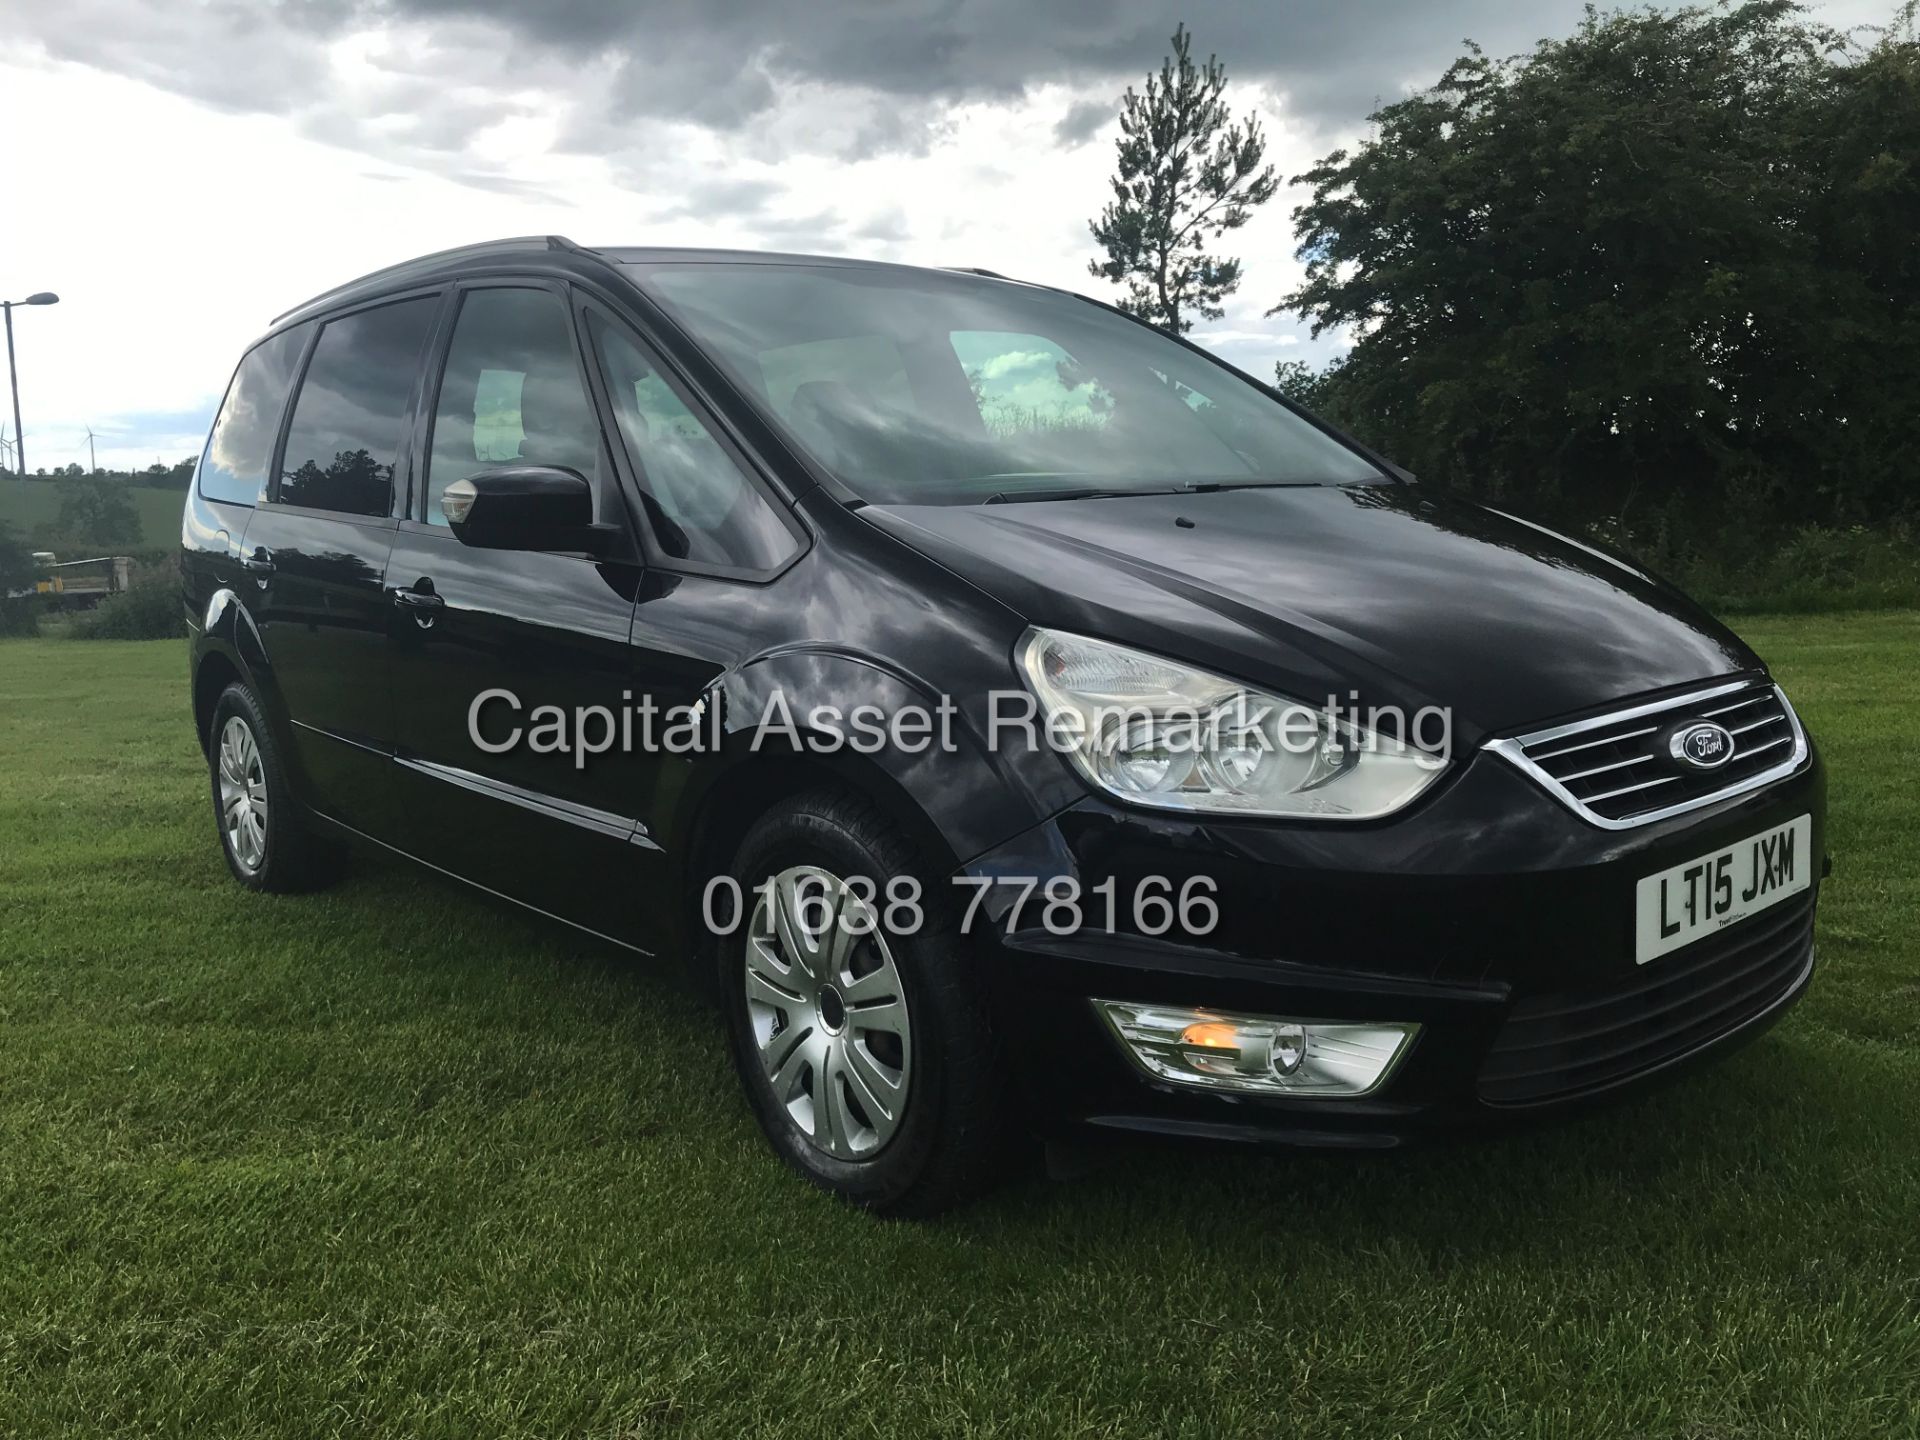 (ON SALE) FORD GALAXY 2.0TDCI "ZETEC" AUTOMATIC 7 SEATER (15 REG) AIR CON - ELEC PACK *NO VAT* - Image 2 of 18